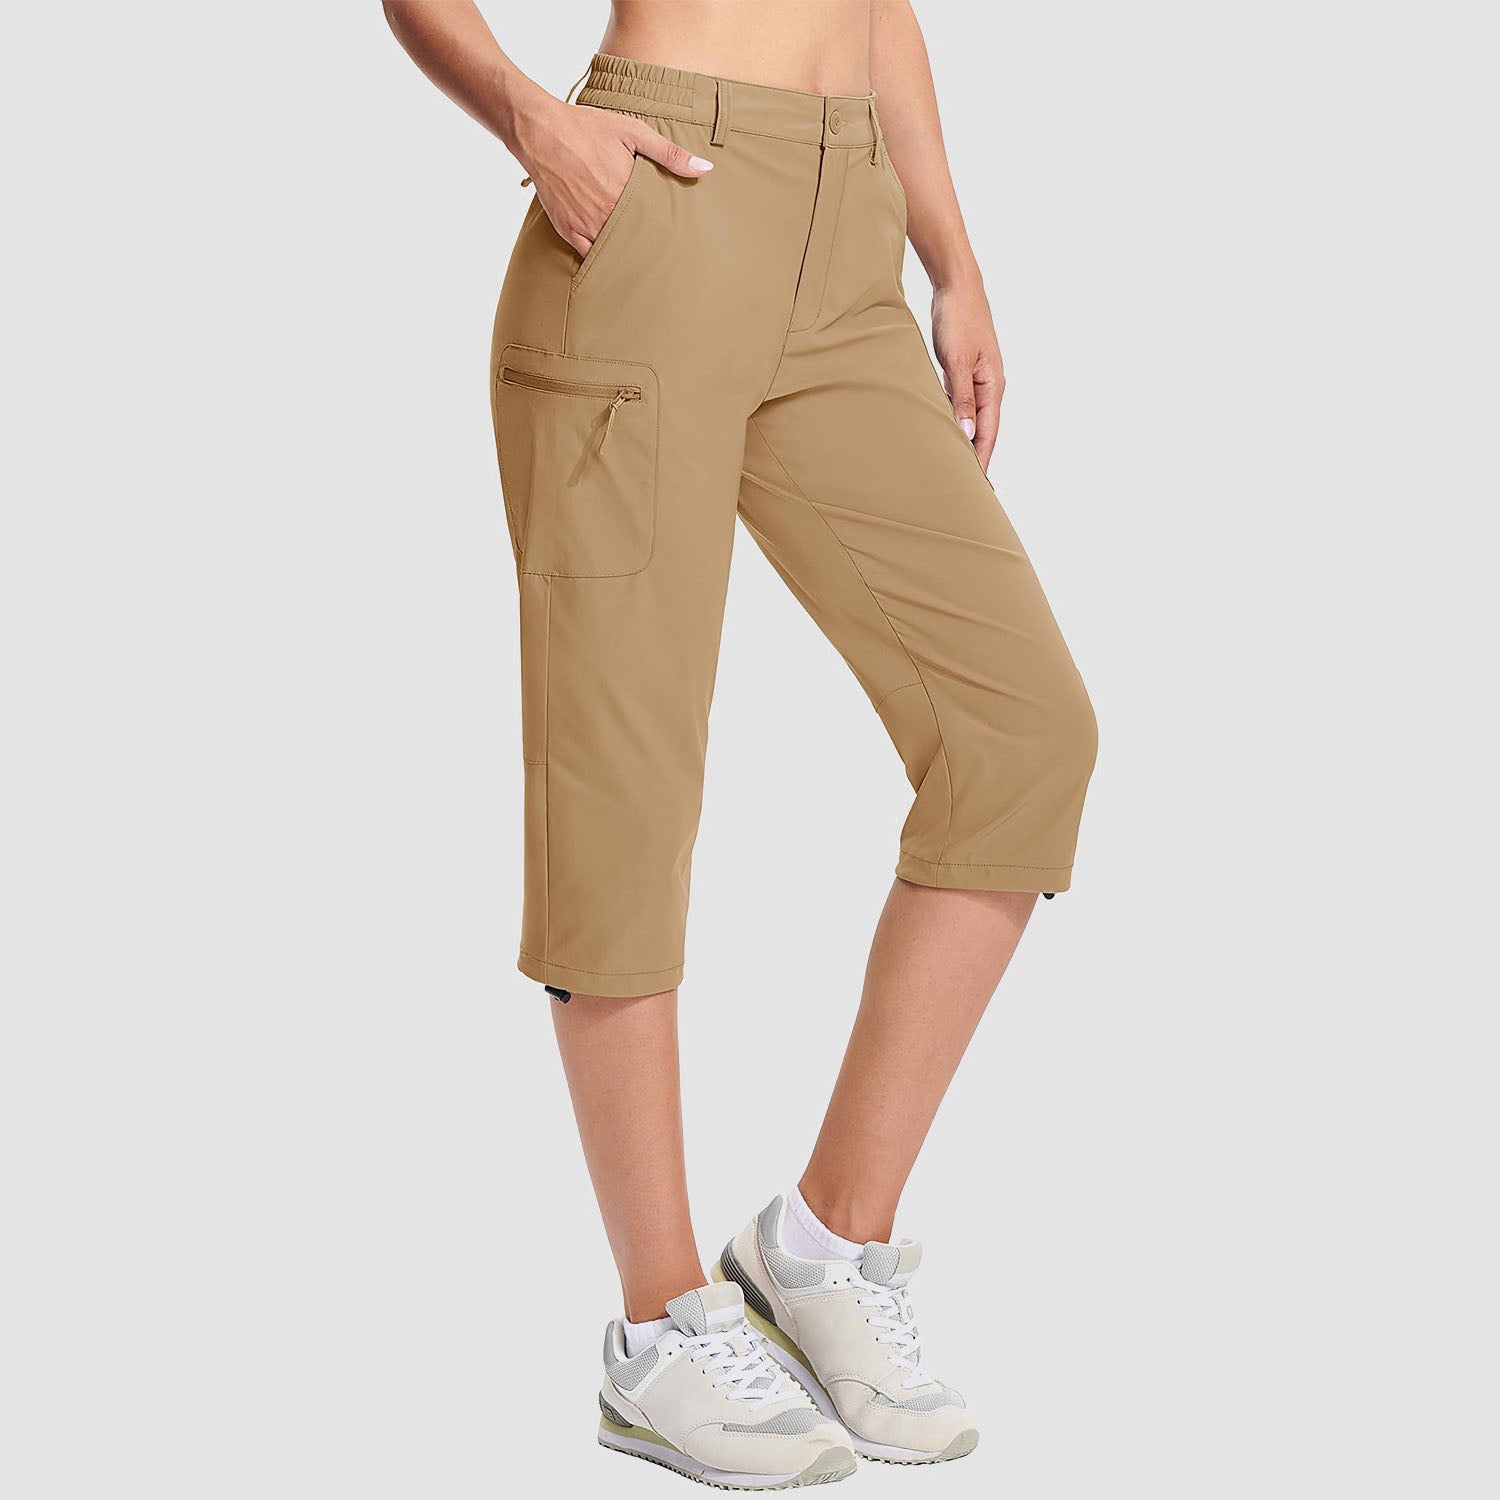 Women's Hiking Capris Lightweight Stretch Water Resistant Joggers with 5 Pockets for Outdoor